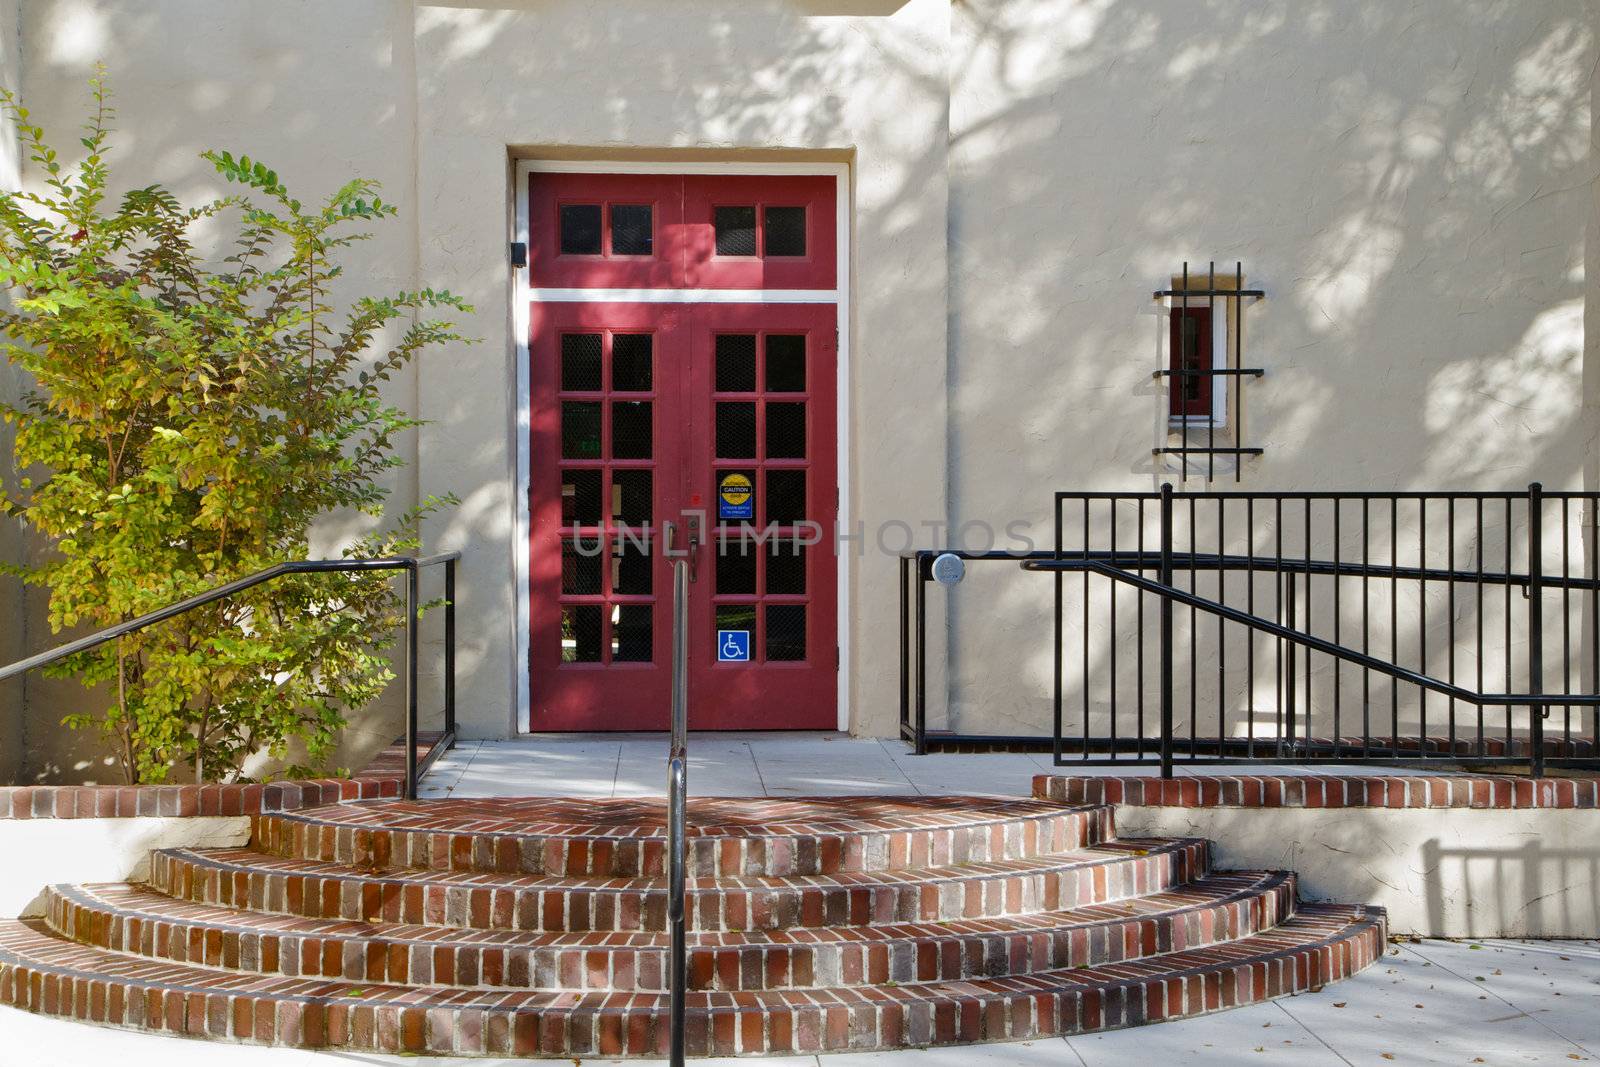 Red Spanish School double doors with brick steps and handicapped assist